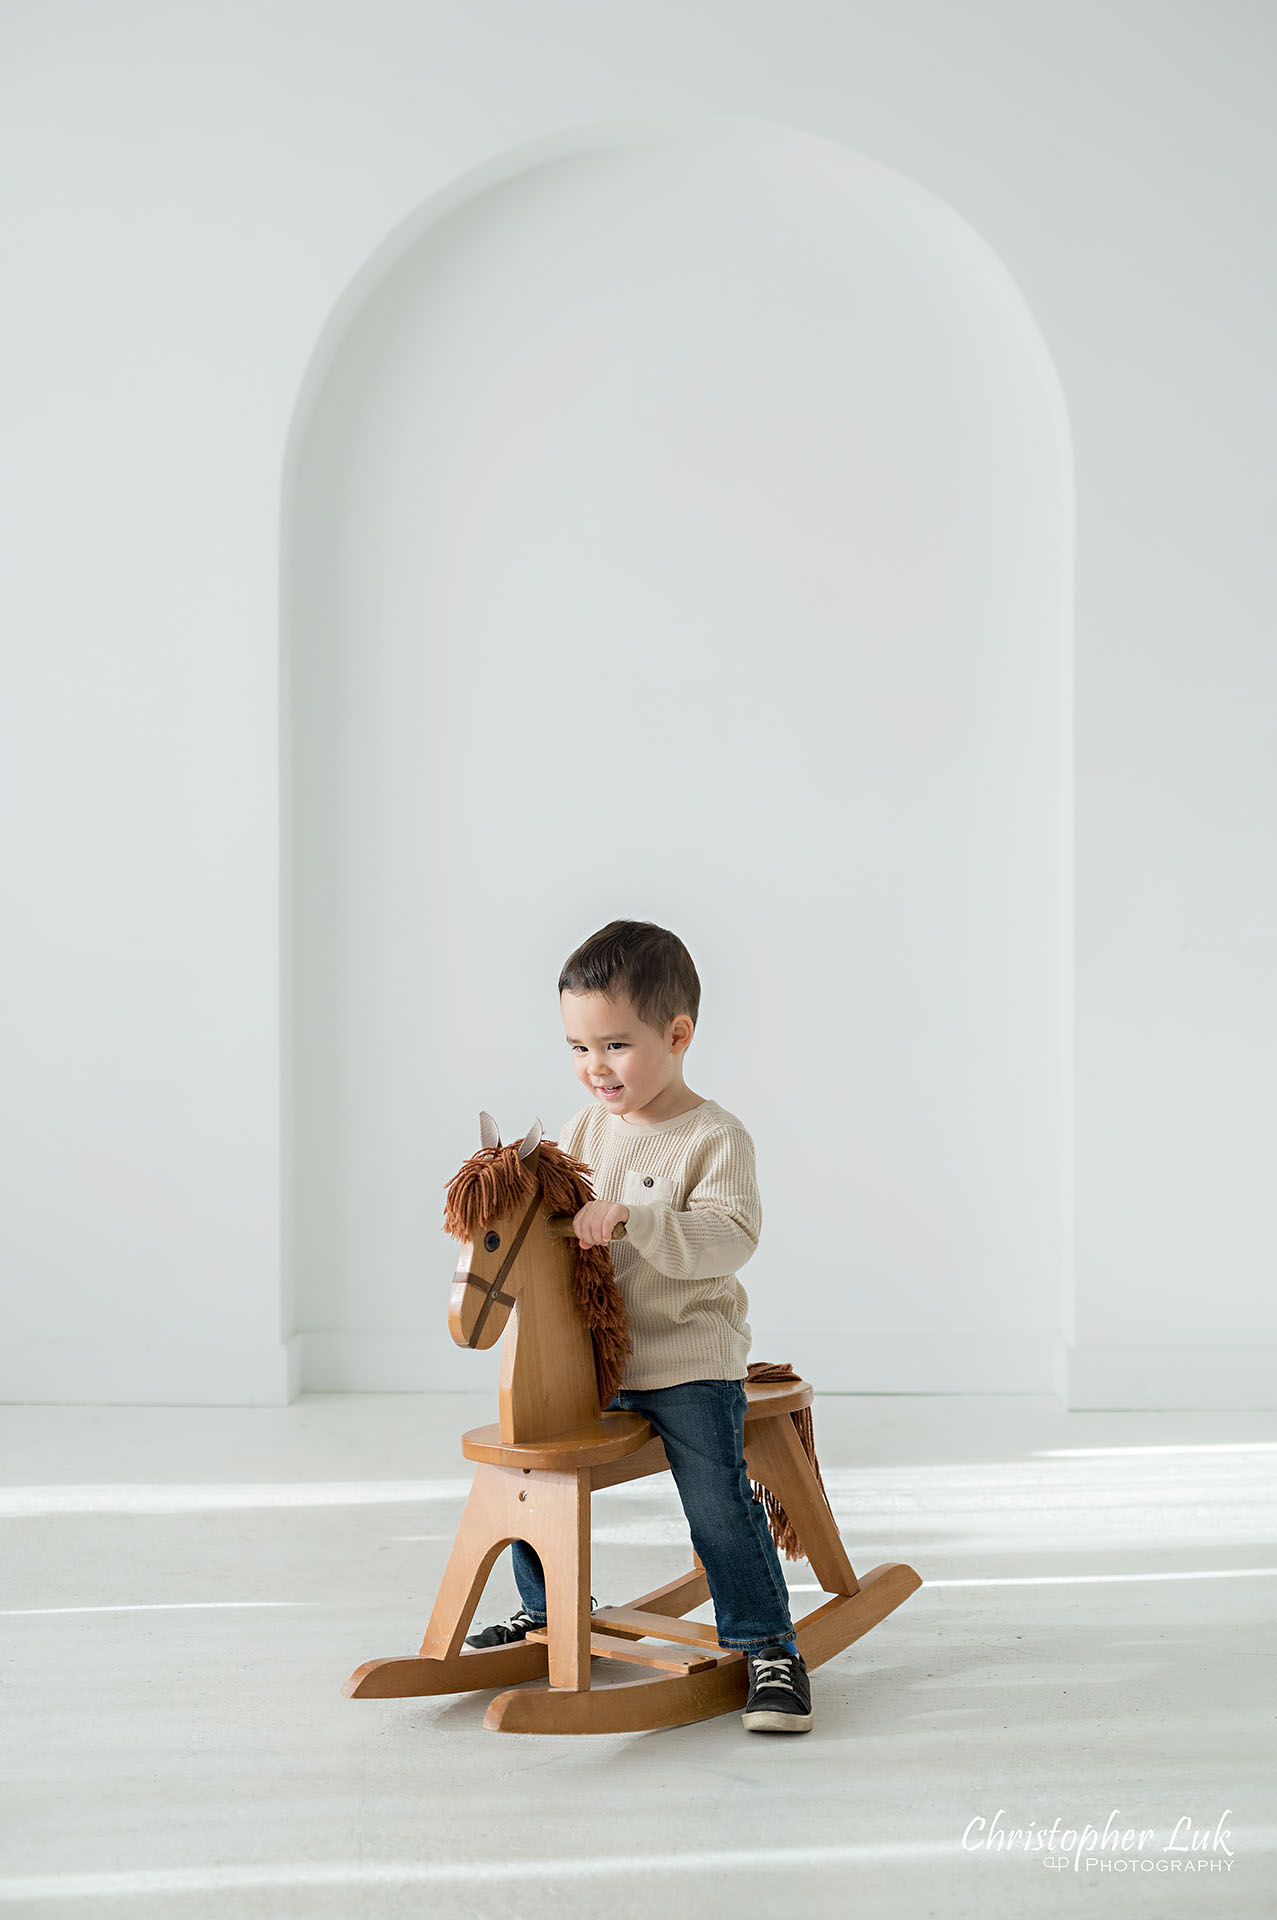 Son Brother Toddler Child Playing Wooden Rocking Horse Family Studio Portrait Candid Natural Photojournalistic